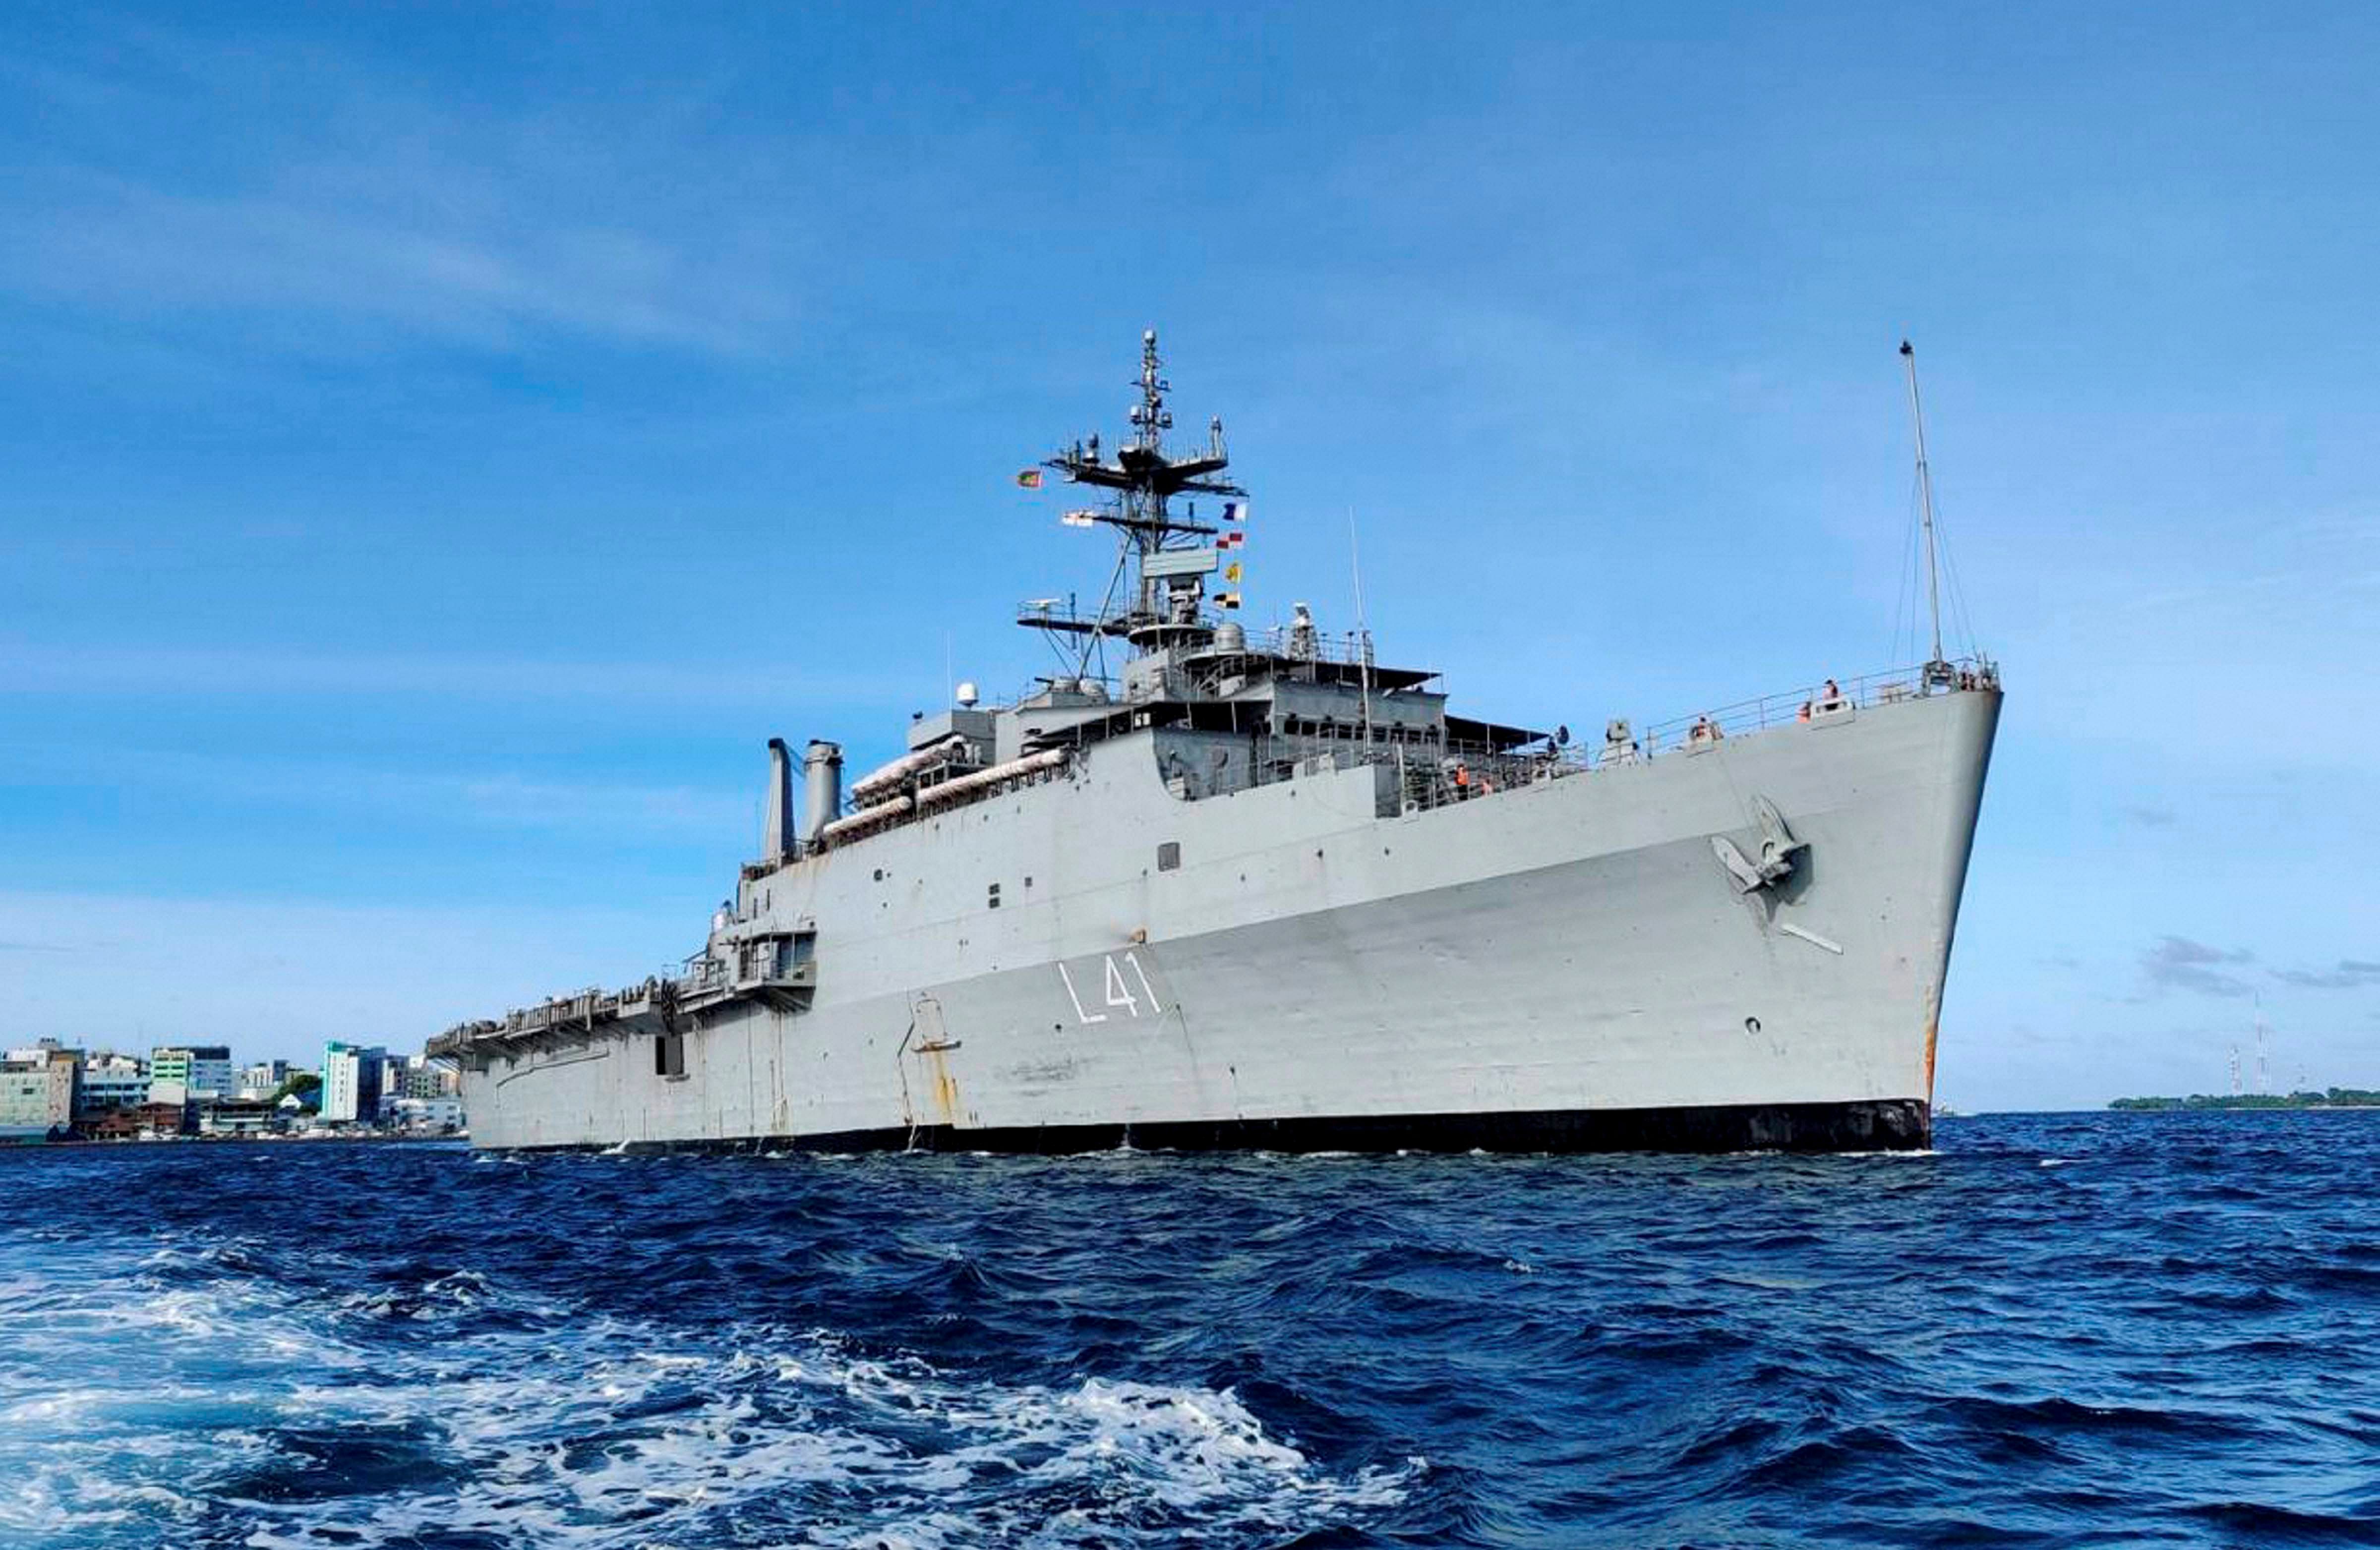 The voyage of the Indian Navy Ship INS Jalashwa is in the series of Operation Samudra Setu, an exercise in which Indian Naval Ships have been deployed to bring back stranded Indians abroad under the Vande Bharat Mission. (PTI photo)